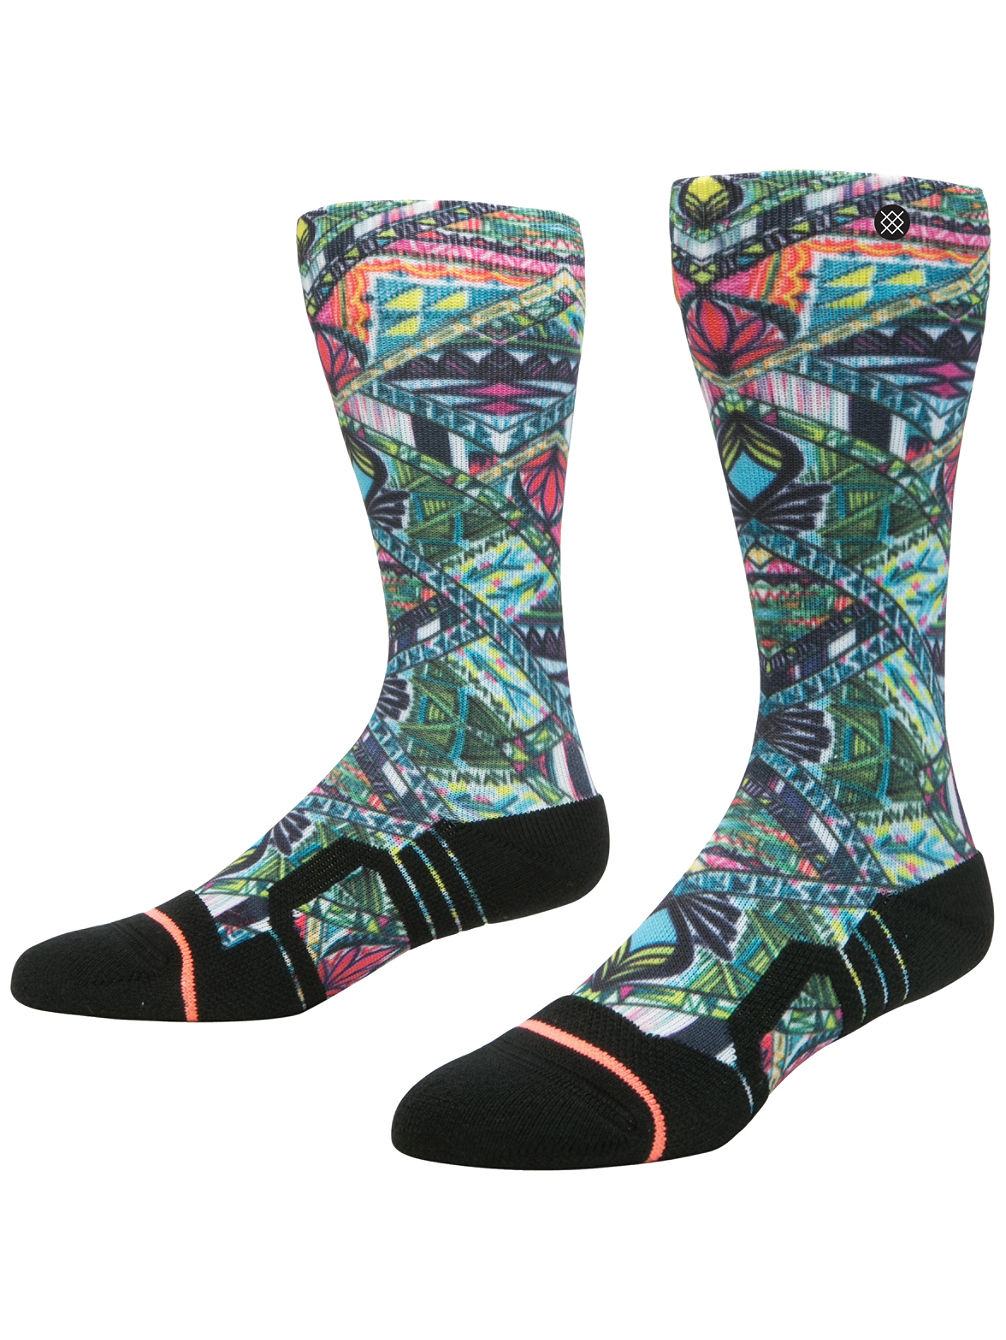 Jelly All Mountain Chaussettes techniques